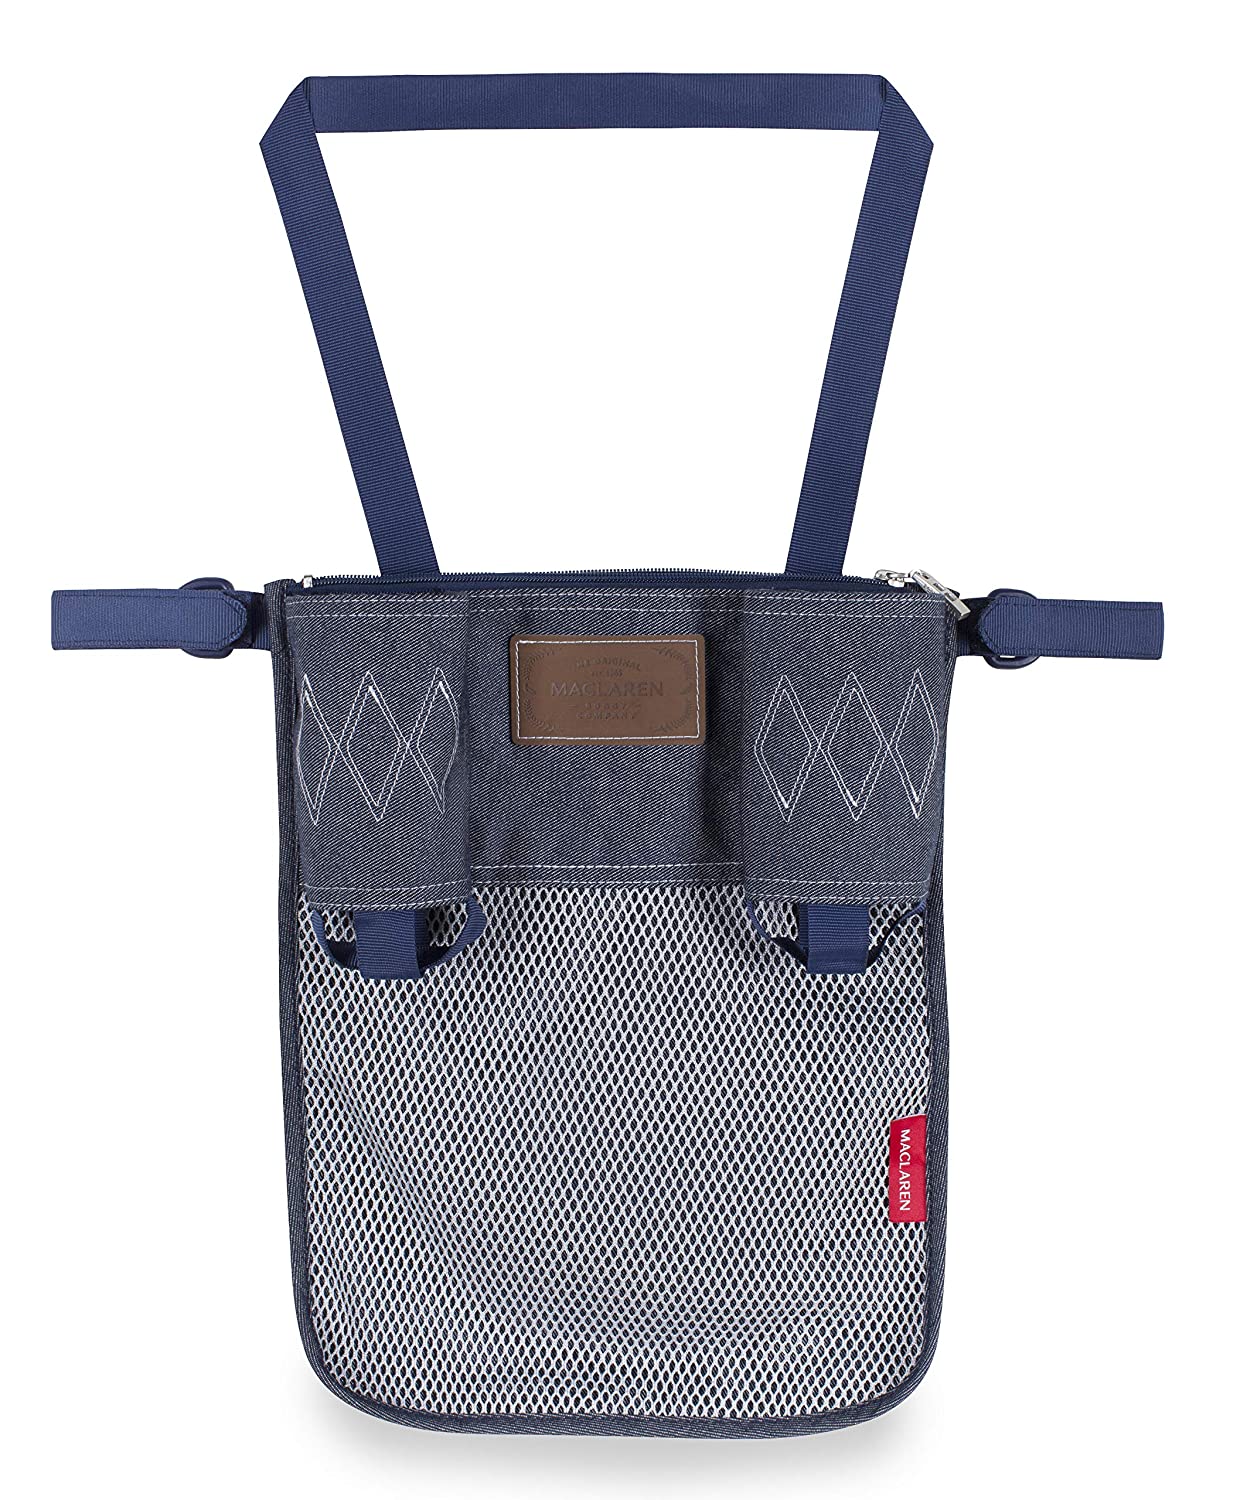 Maclaren SINGLE STROLLER ORGANIZER - Keep the most important things within easy reach. Quickly and easily attach to all Maclaren strollers and all other brands umbrella folding buggies